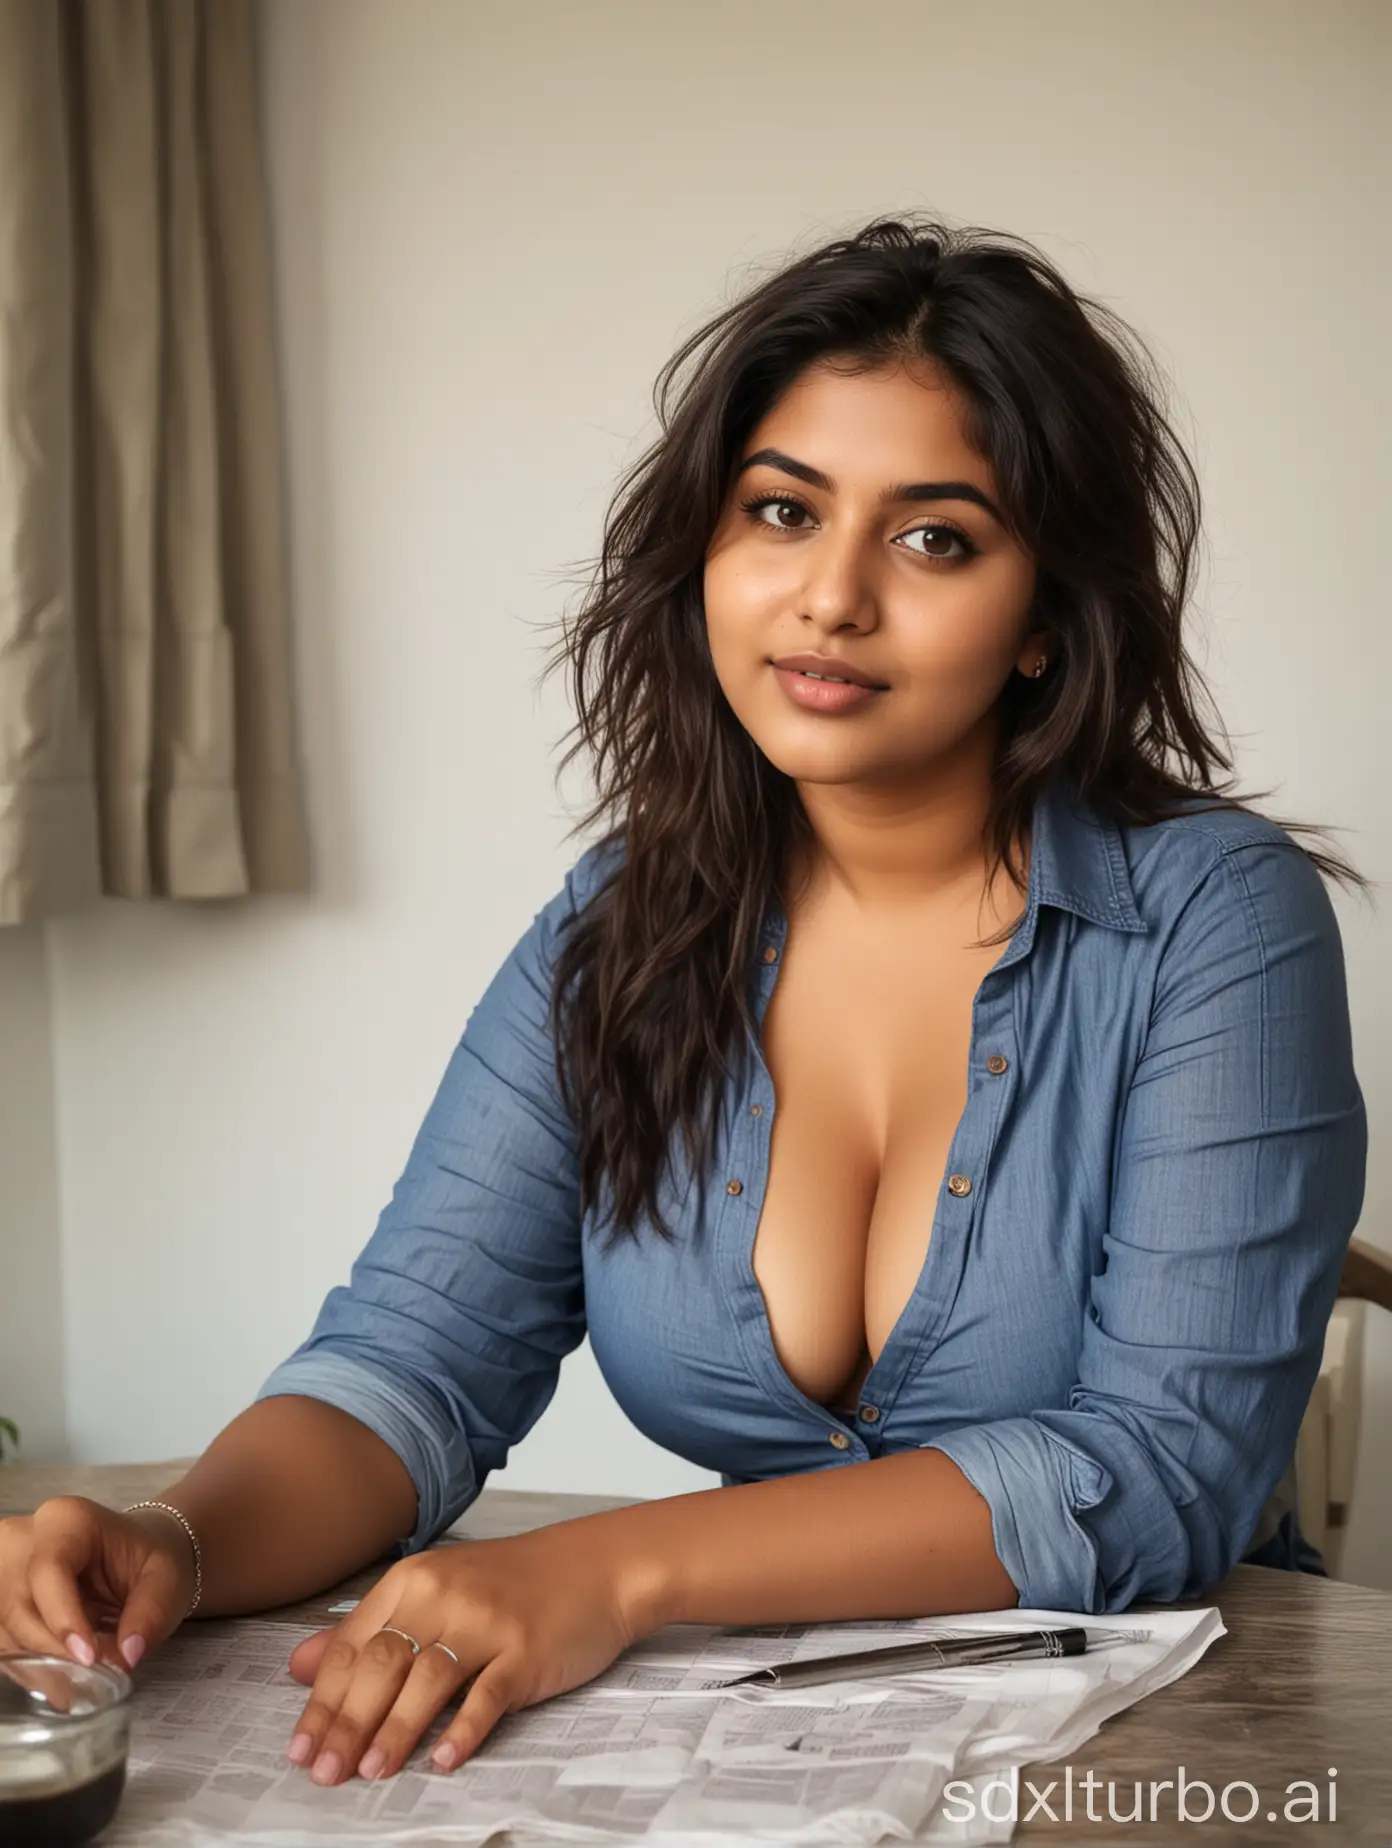 Curvy and busty Indian girl with brunette messy layered hair, deep v cleavages, sitting across the table. Wearing a unbuttoned shirt.